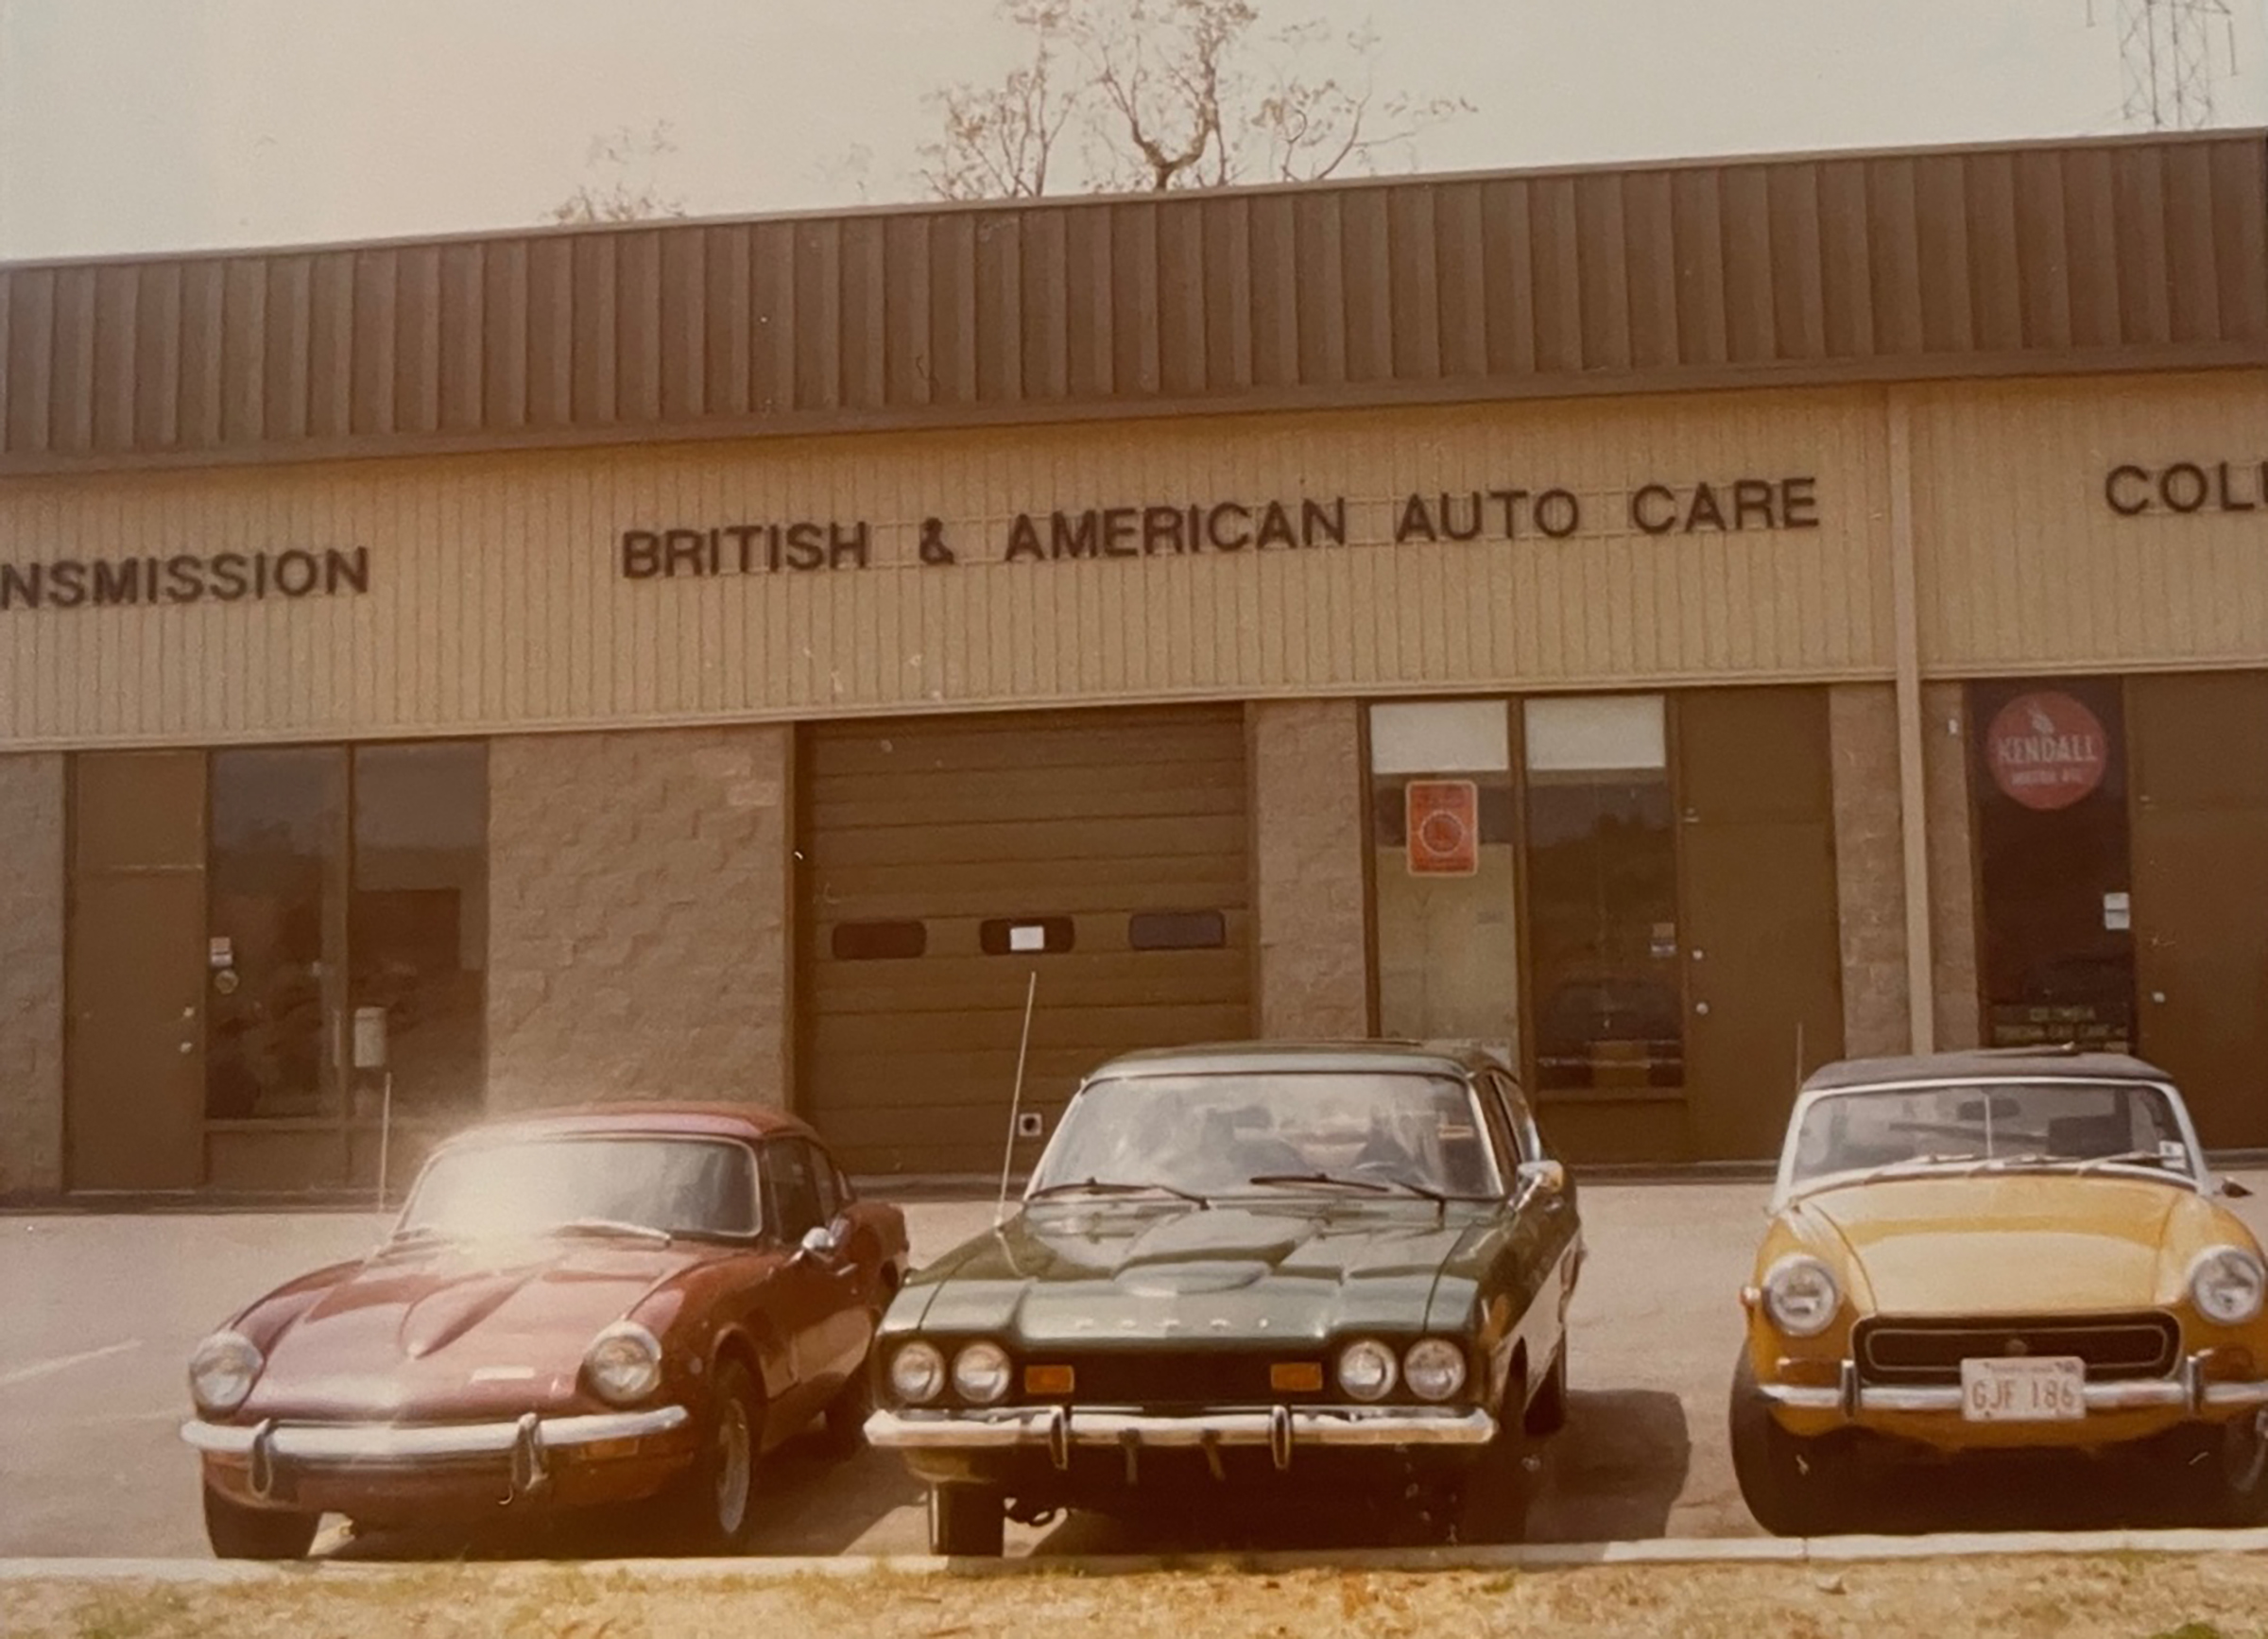 BA Auto Care Celebrates 45 Years of “Looking Out For You and Your Car”